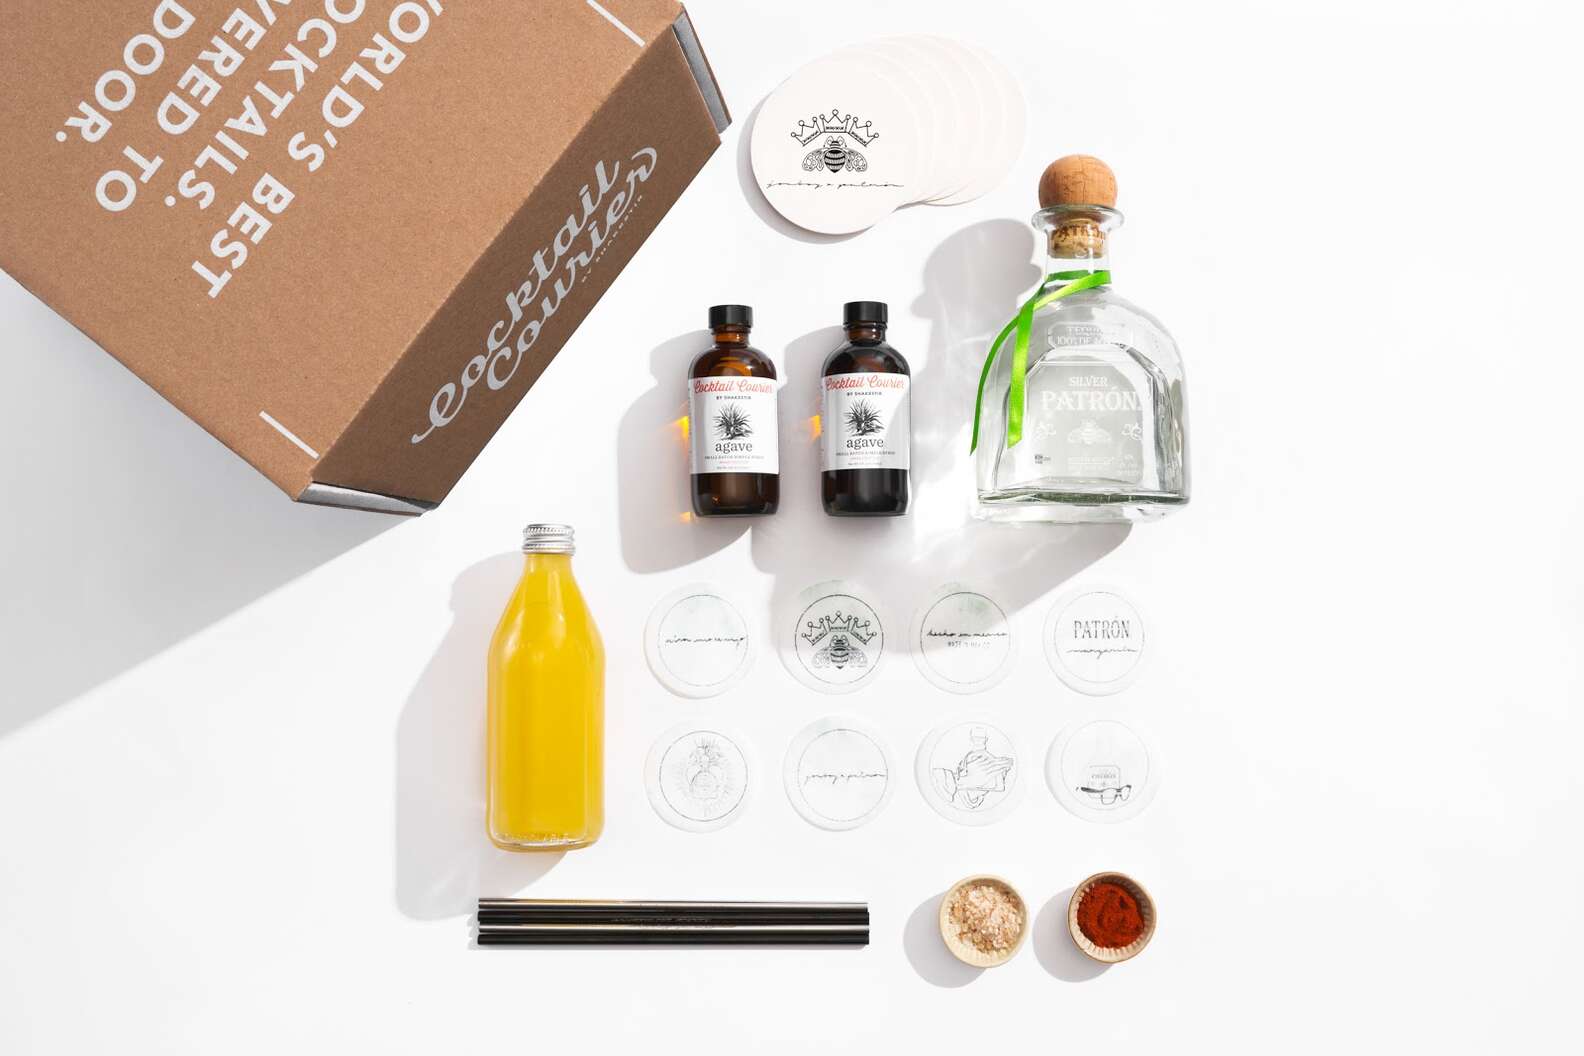 Patrón Has Margarita Kits You Can Get Shipped Right To Your Door